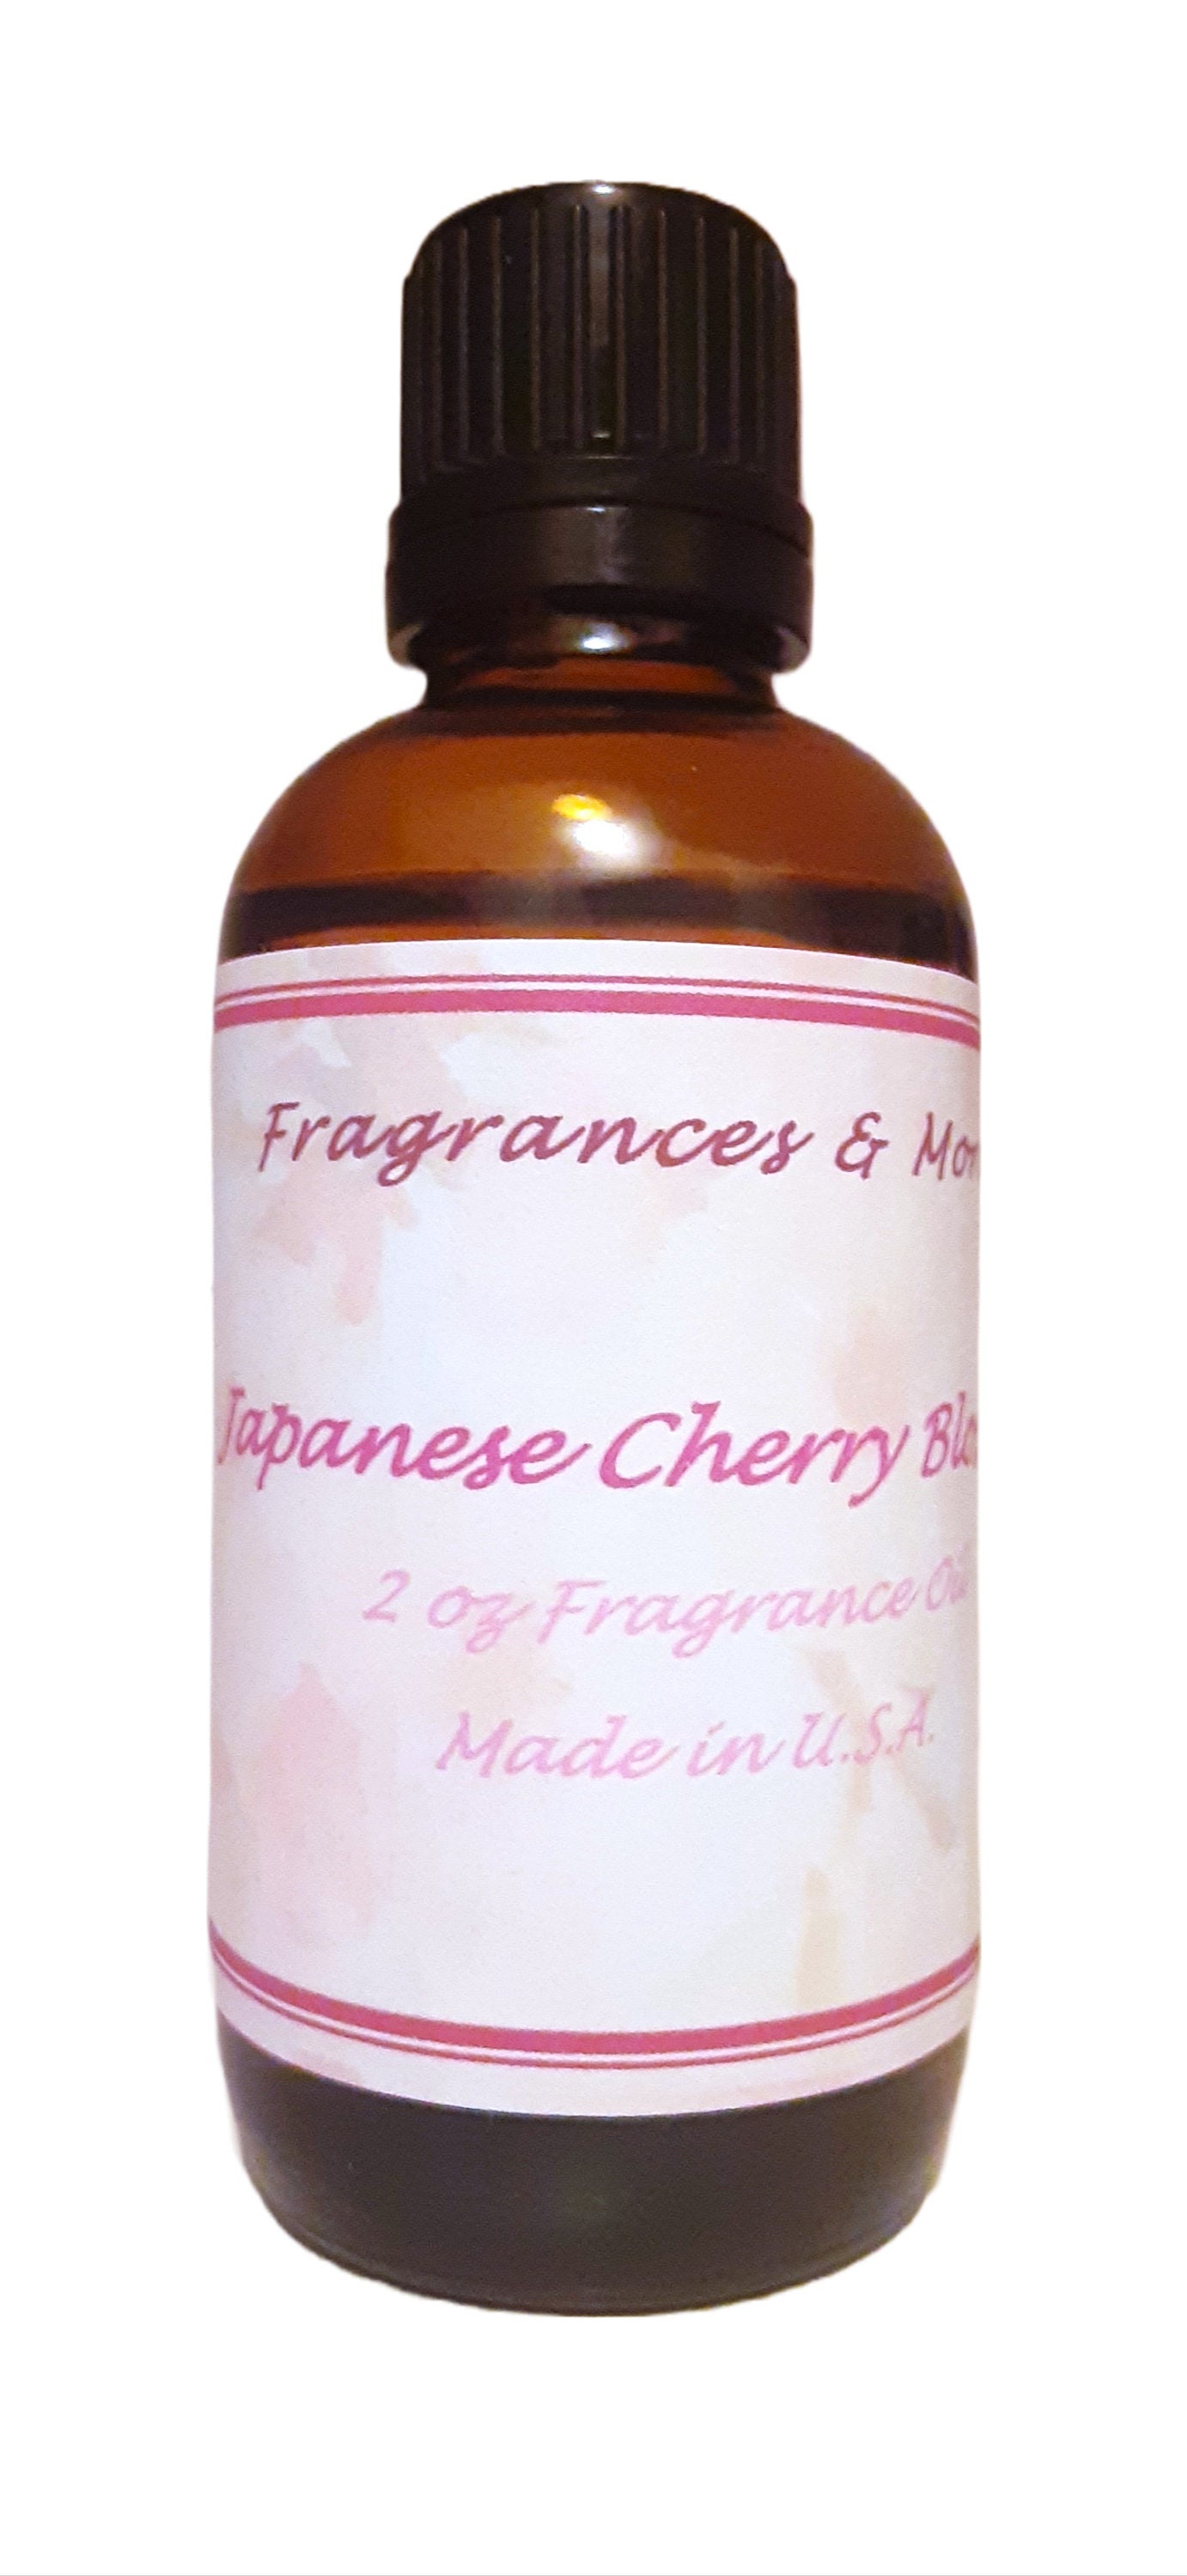 Japanese Cherry Blossom Fragrance Oil for Soap Making, Candle Making, Bath  and Body Products, Home Sprays, Diffusers and Much More. 2 Oz. 